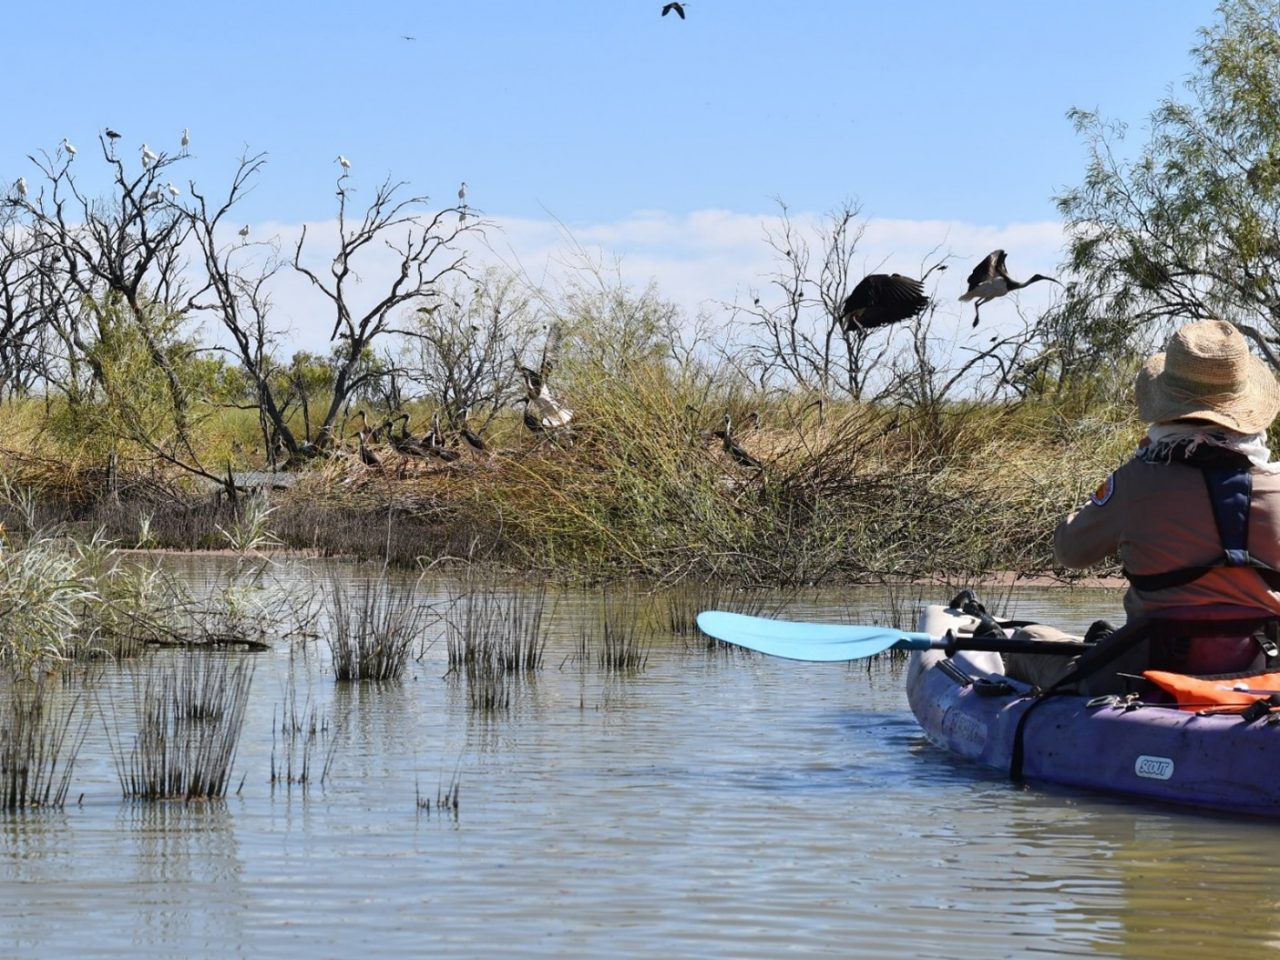 Researcher floating in a kayak on a wetland looking at Straw Necked Ibis in vegetation